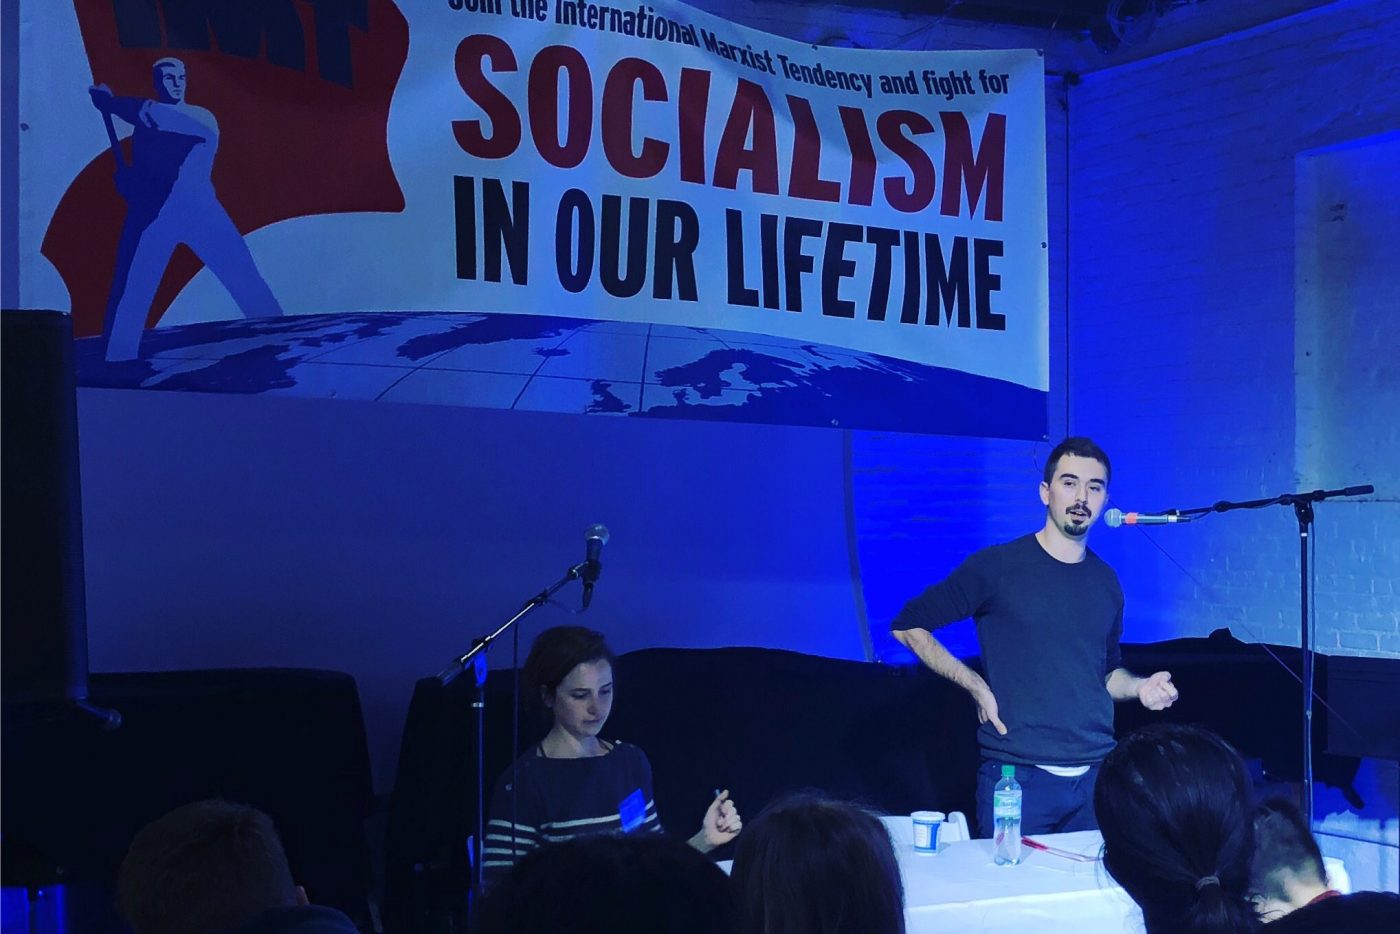 In his presentation Antonio Balmer stressed the need to build a revolutionary party with the correct ideas and program ahead of big upheavals Image Socialist Revolution